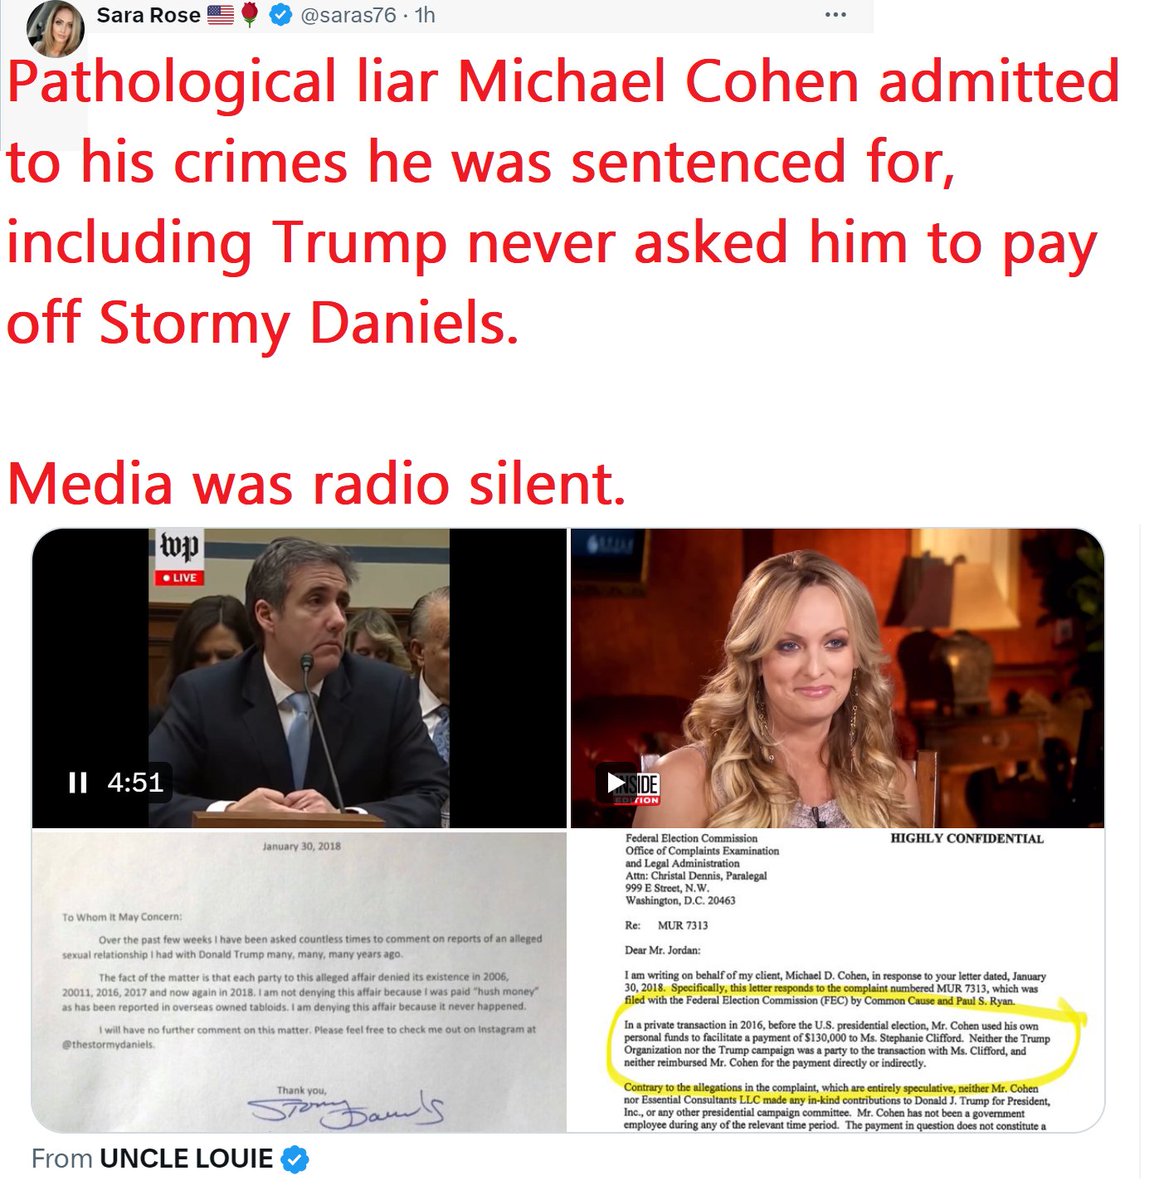 🇺🇸❤️PATRIOT FOLLOW TRAIN❤️🇺🇸 🇺🇸❤️HAPPY TUESDAY !❤️🇺🇸 🇺🇸❤️DROP YOUR HANDLES ❤️🇺🇸 🇺🇸❤️FOLLOW OTHER PATRIOTS❤️🇺🇸 🔥❤️LIKE & RETWEET IFBAP❤️🔥 🇺🇸❤️PRAY FOR TRUMP❤️🇺🇸 Pathological liar Michael Cohen admitted to his crimes he was sentenced for, including Trump never asked him